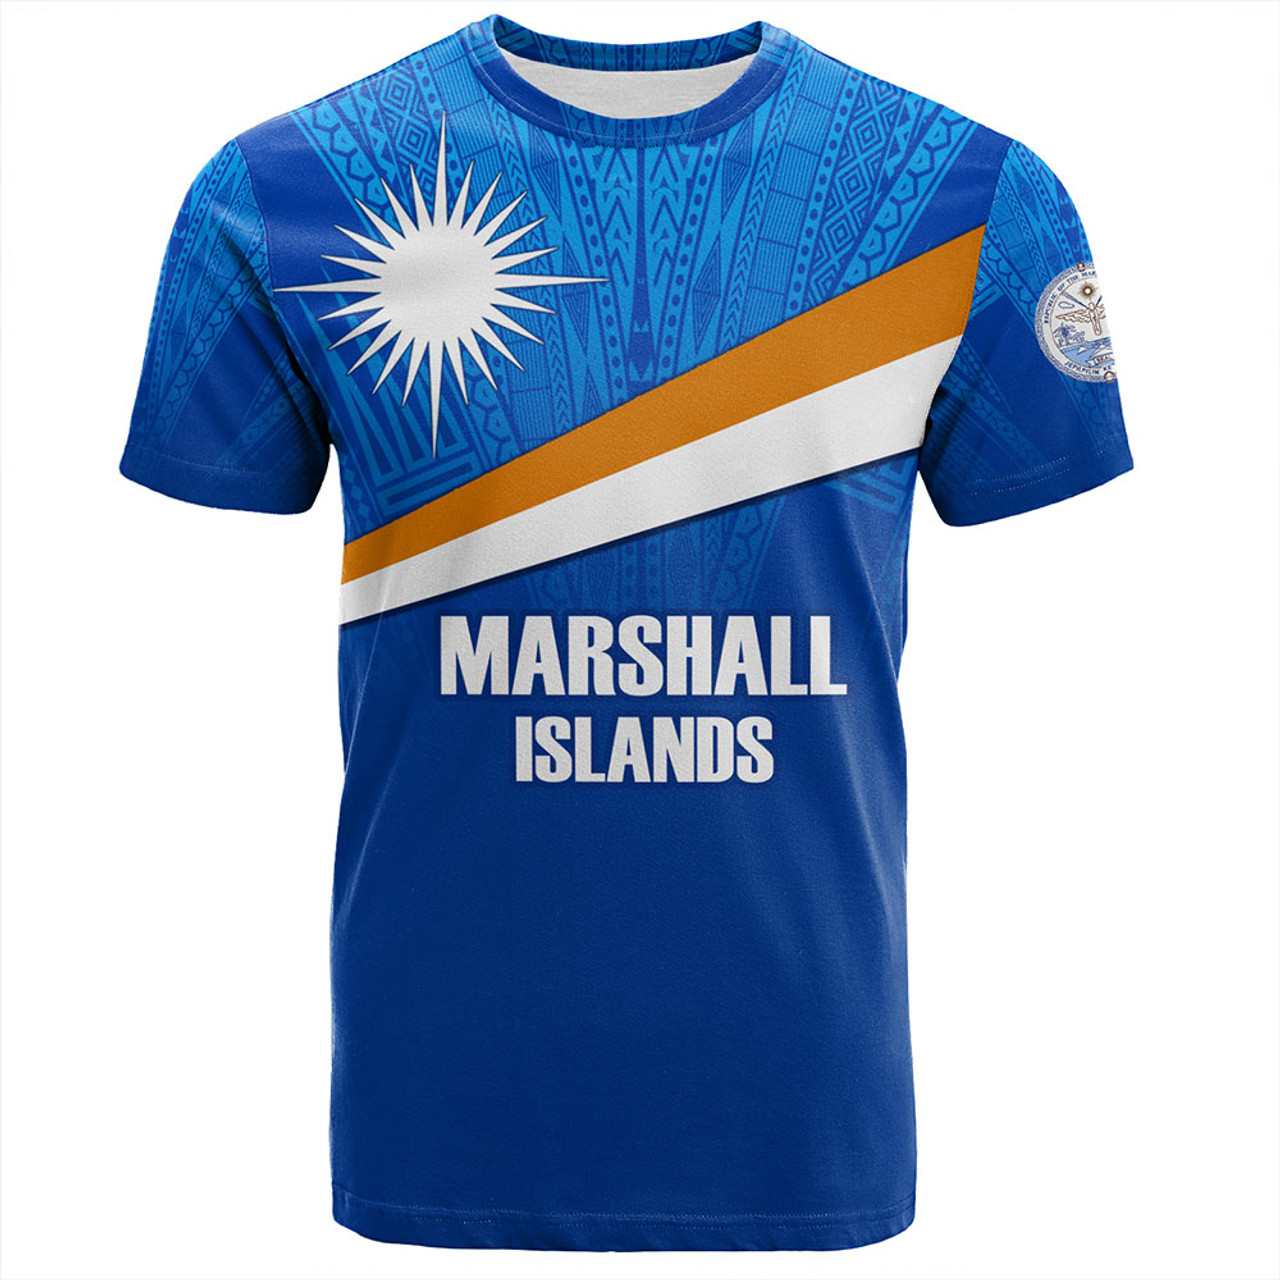 Marshall Islands T-Shirt - Flag Color With Traditional Patterns